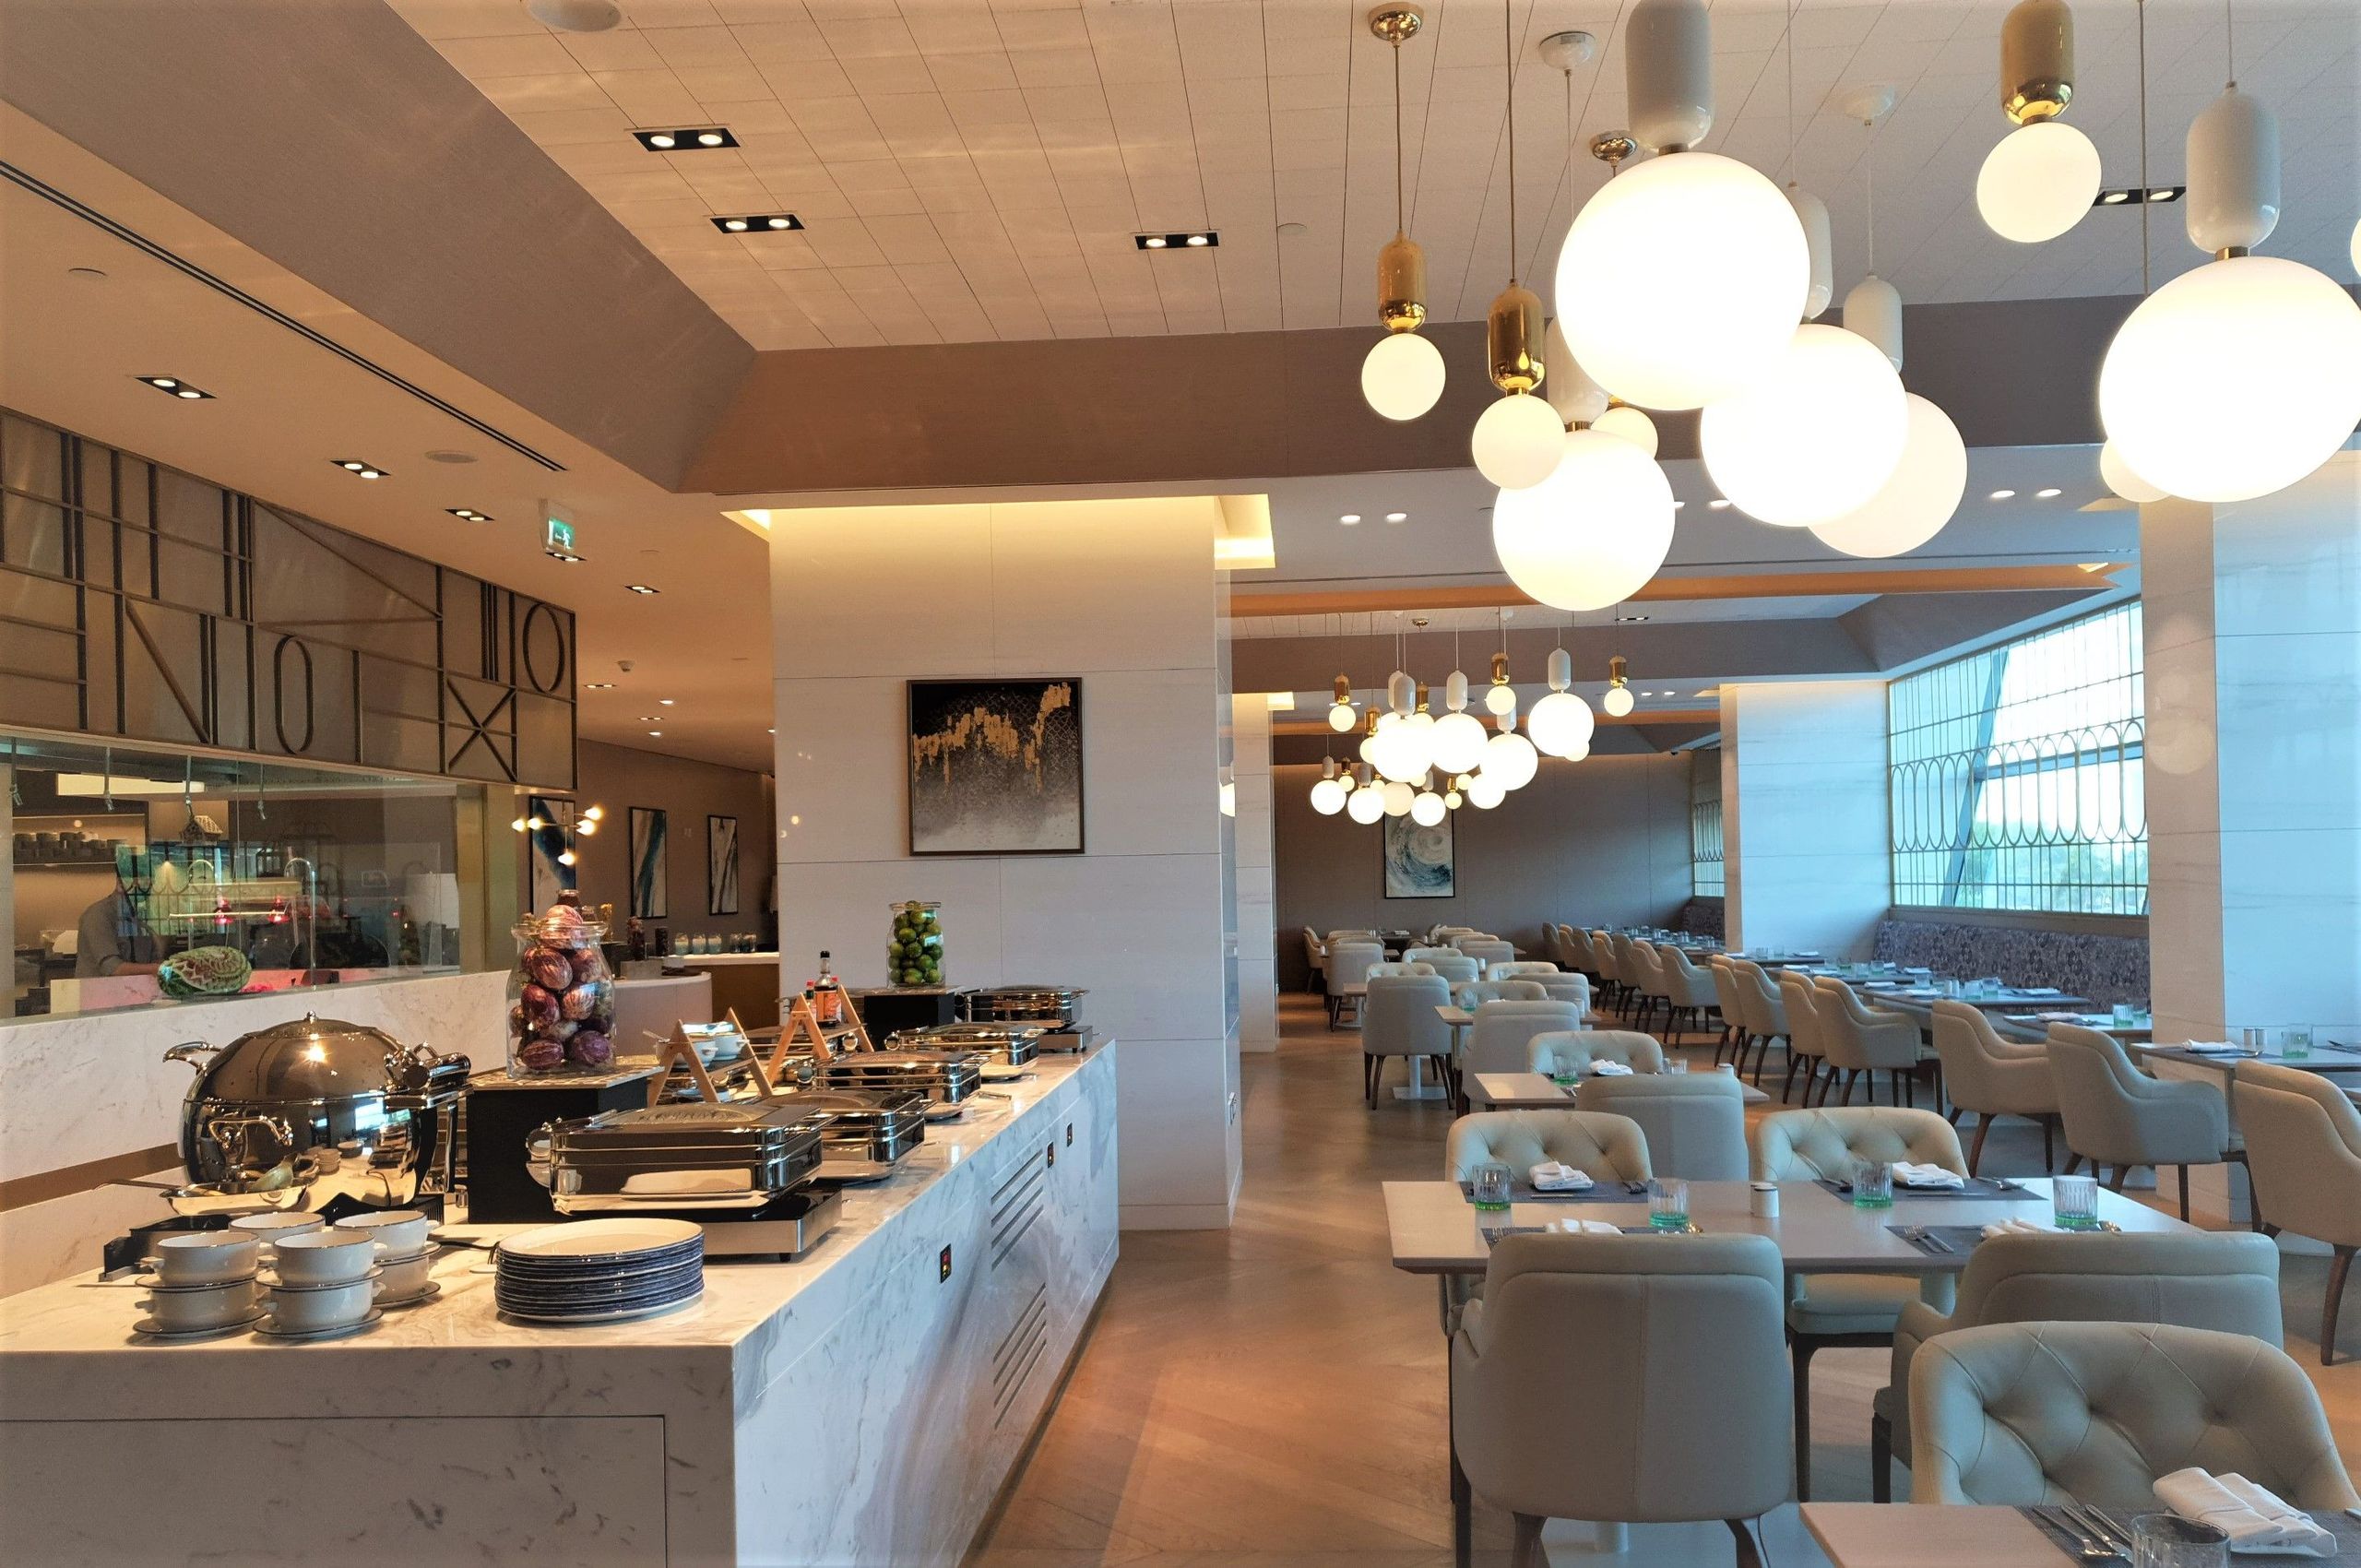 Hotel in Katar - Steigenberger Hotel Doha - Crust Cafe and Bakery